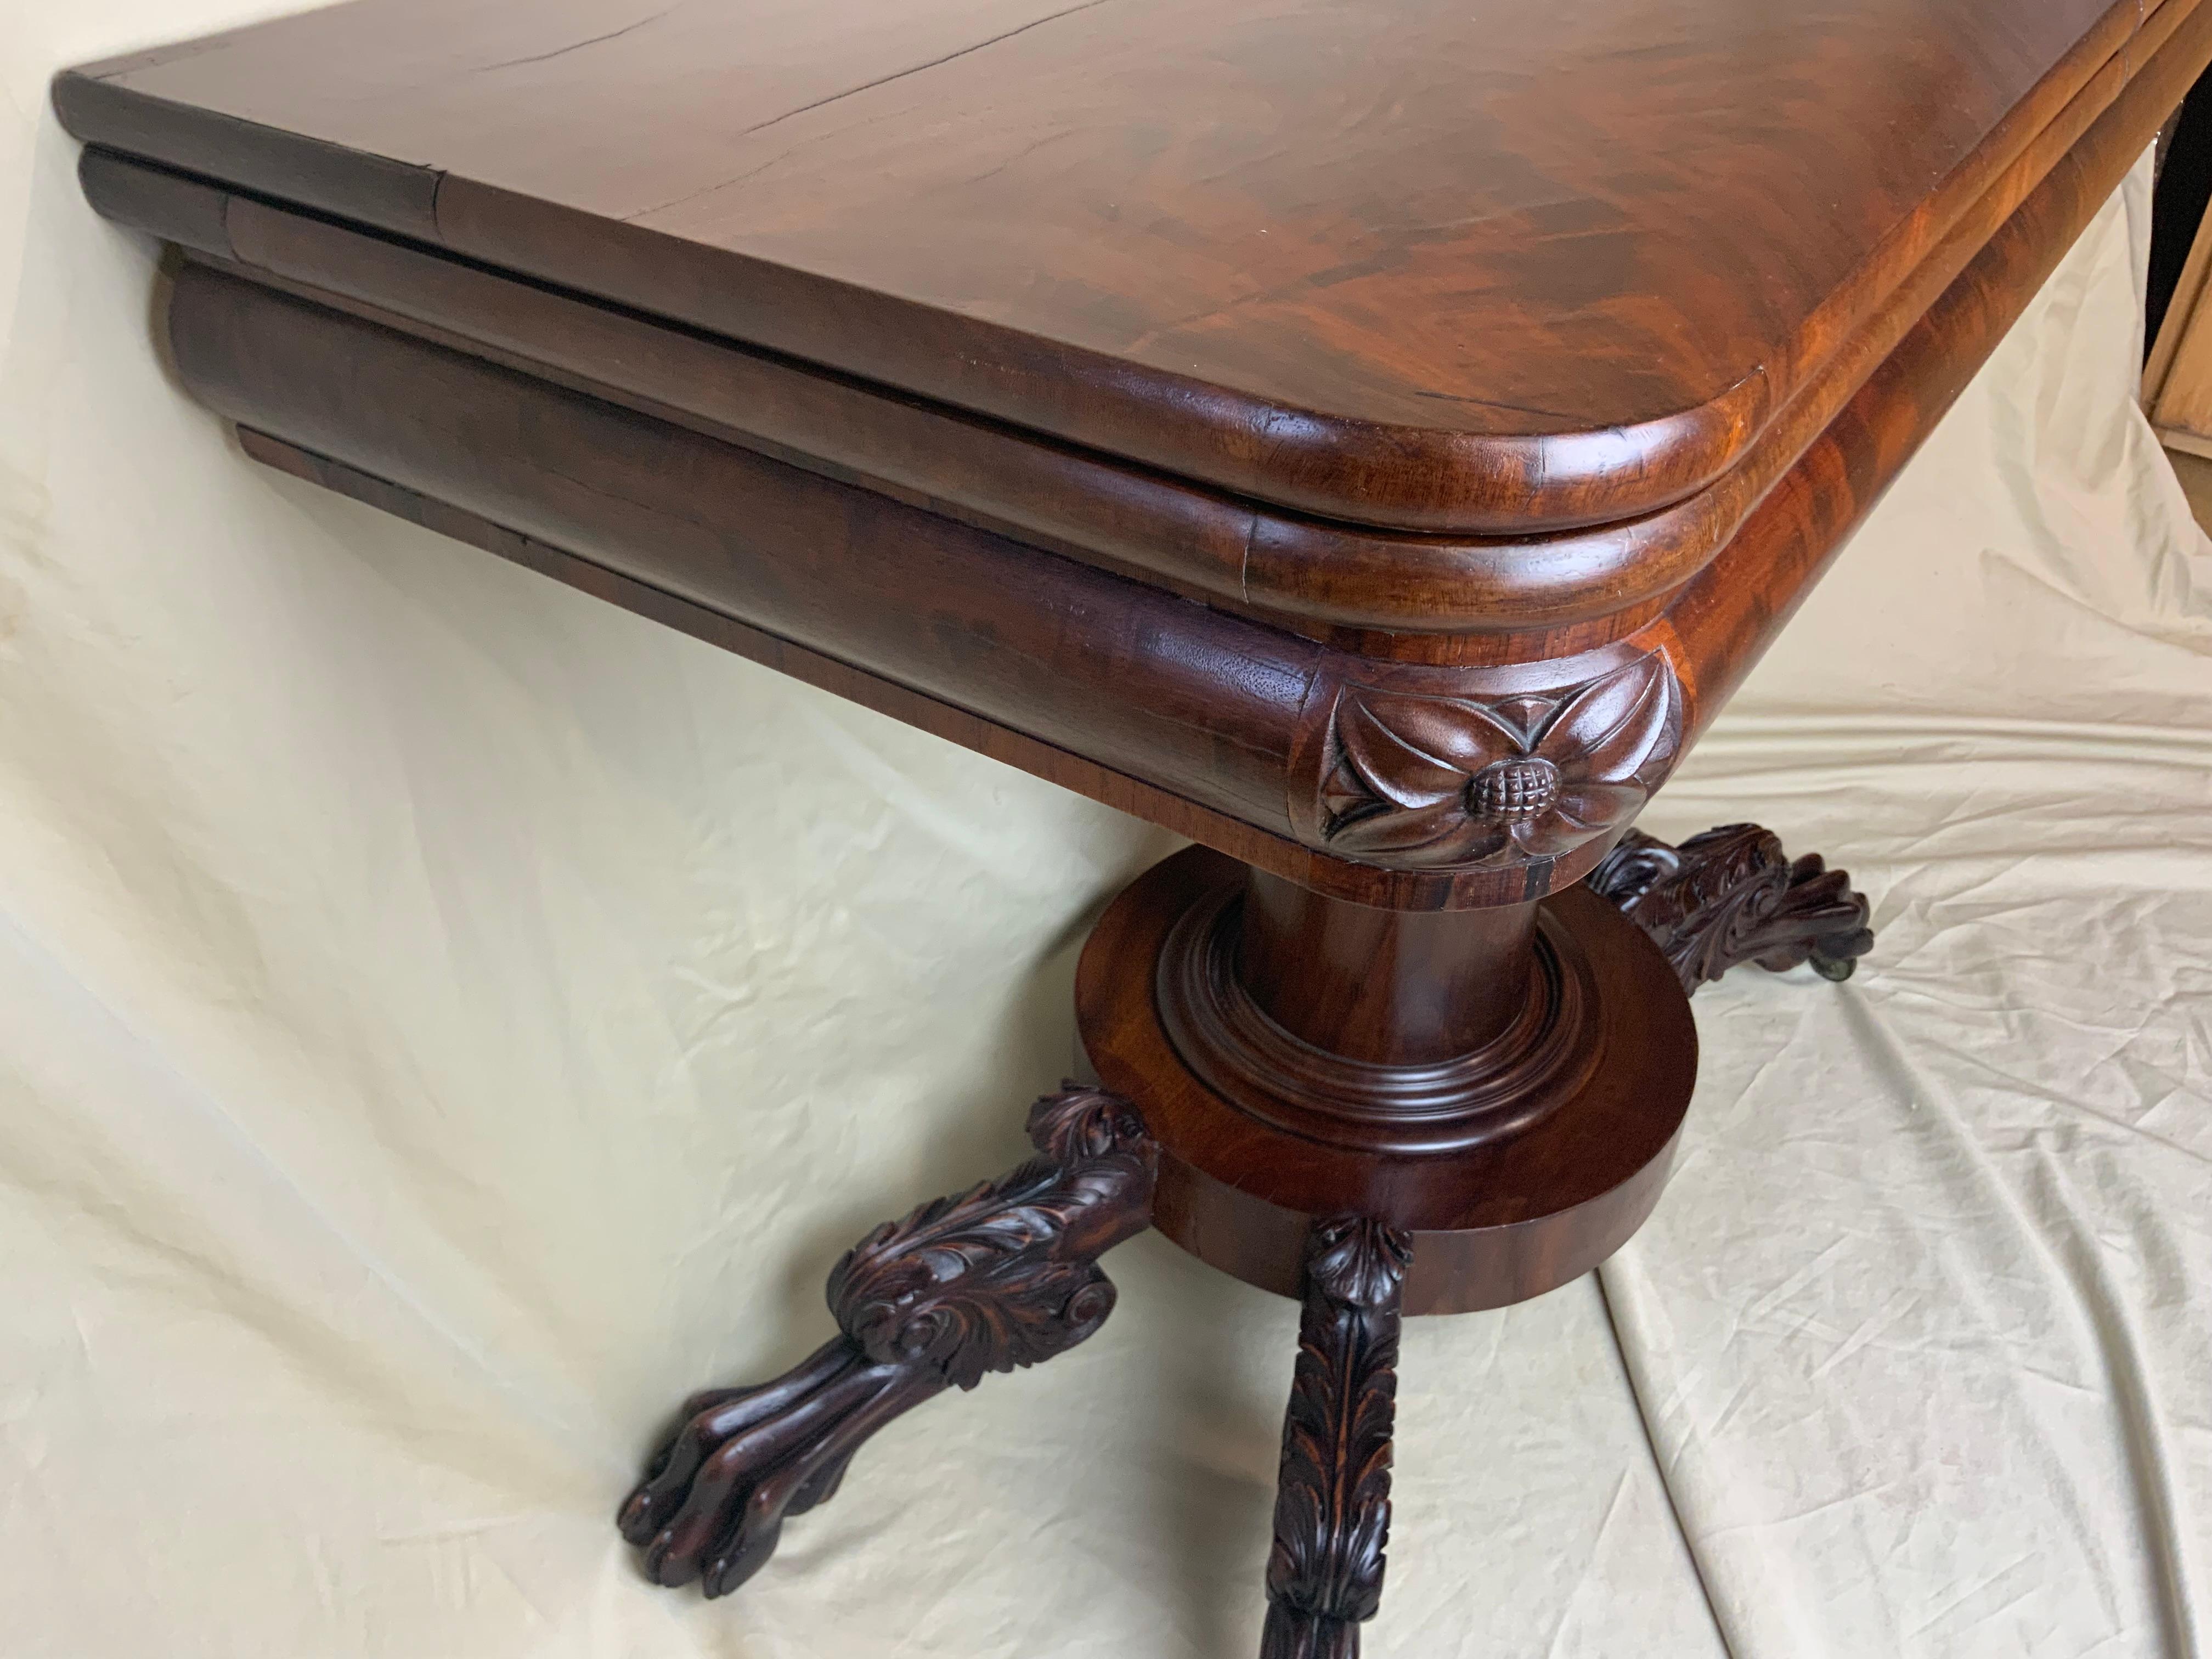 Very fine Late Federal Mahogany and Rosewood paw foot card table. Nicely figured and book matched Mahogany tops that lay nice and flat over a Mahogany and Rosewood banded frieze with carved corners. The elongated finely carved paw feet are in